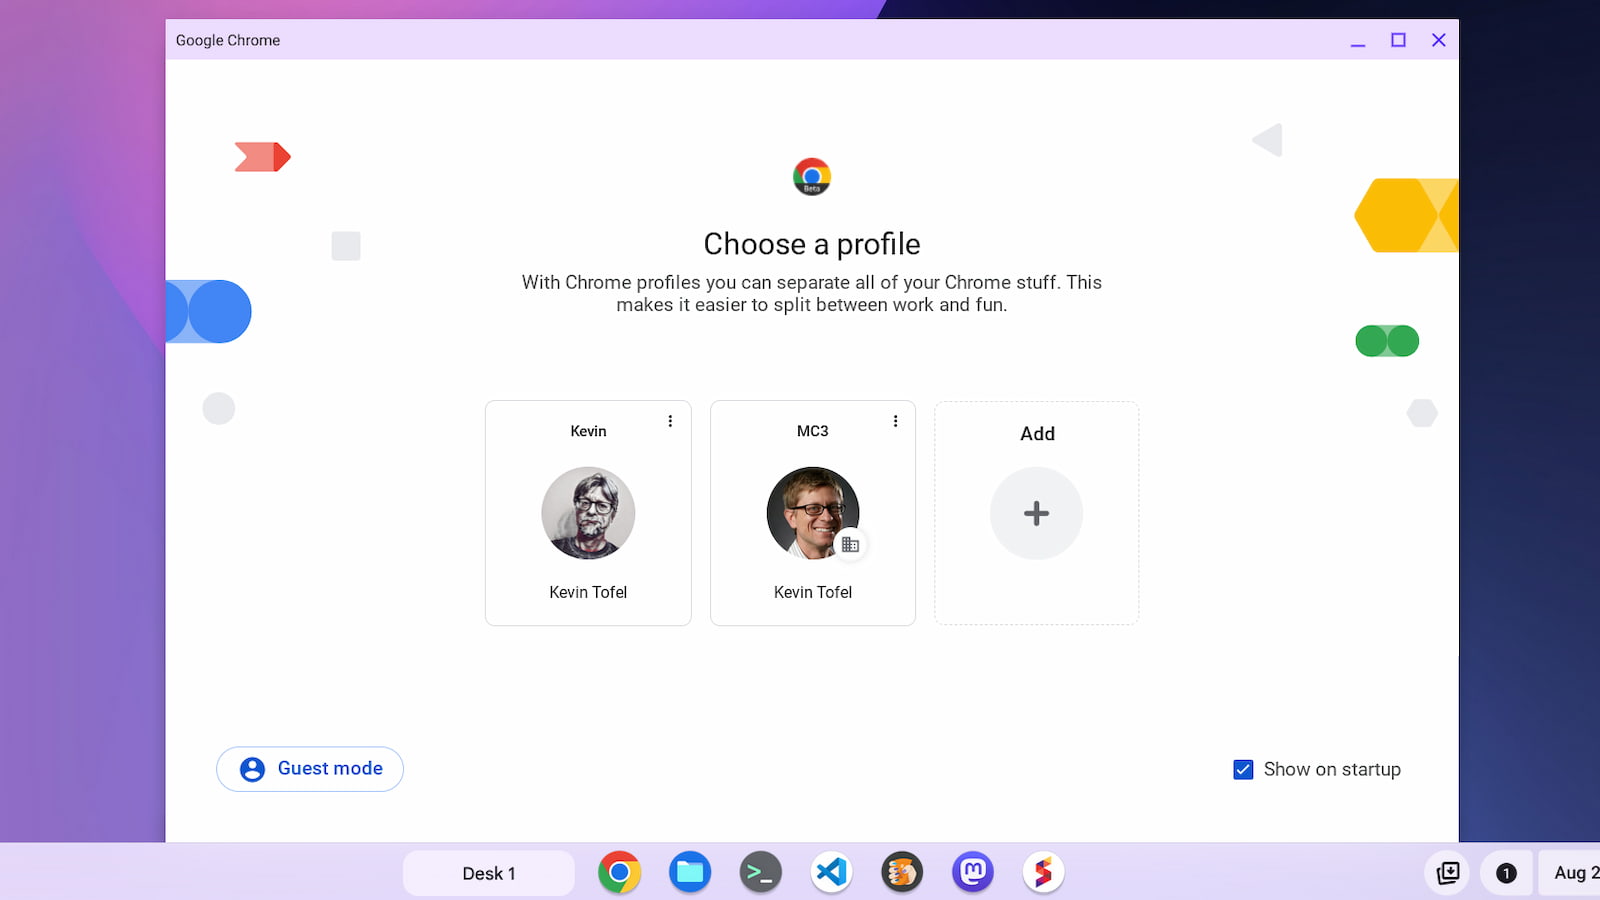 The ChromeOS 116 release adds new features including a start to the transition of a new browser with improved profile switching